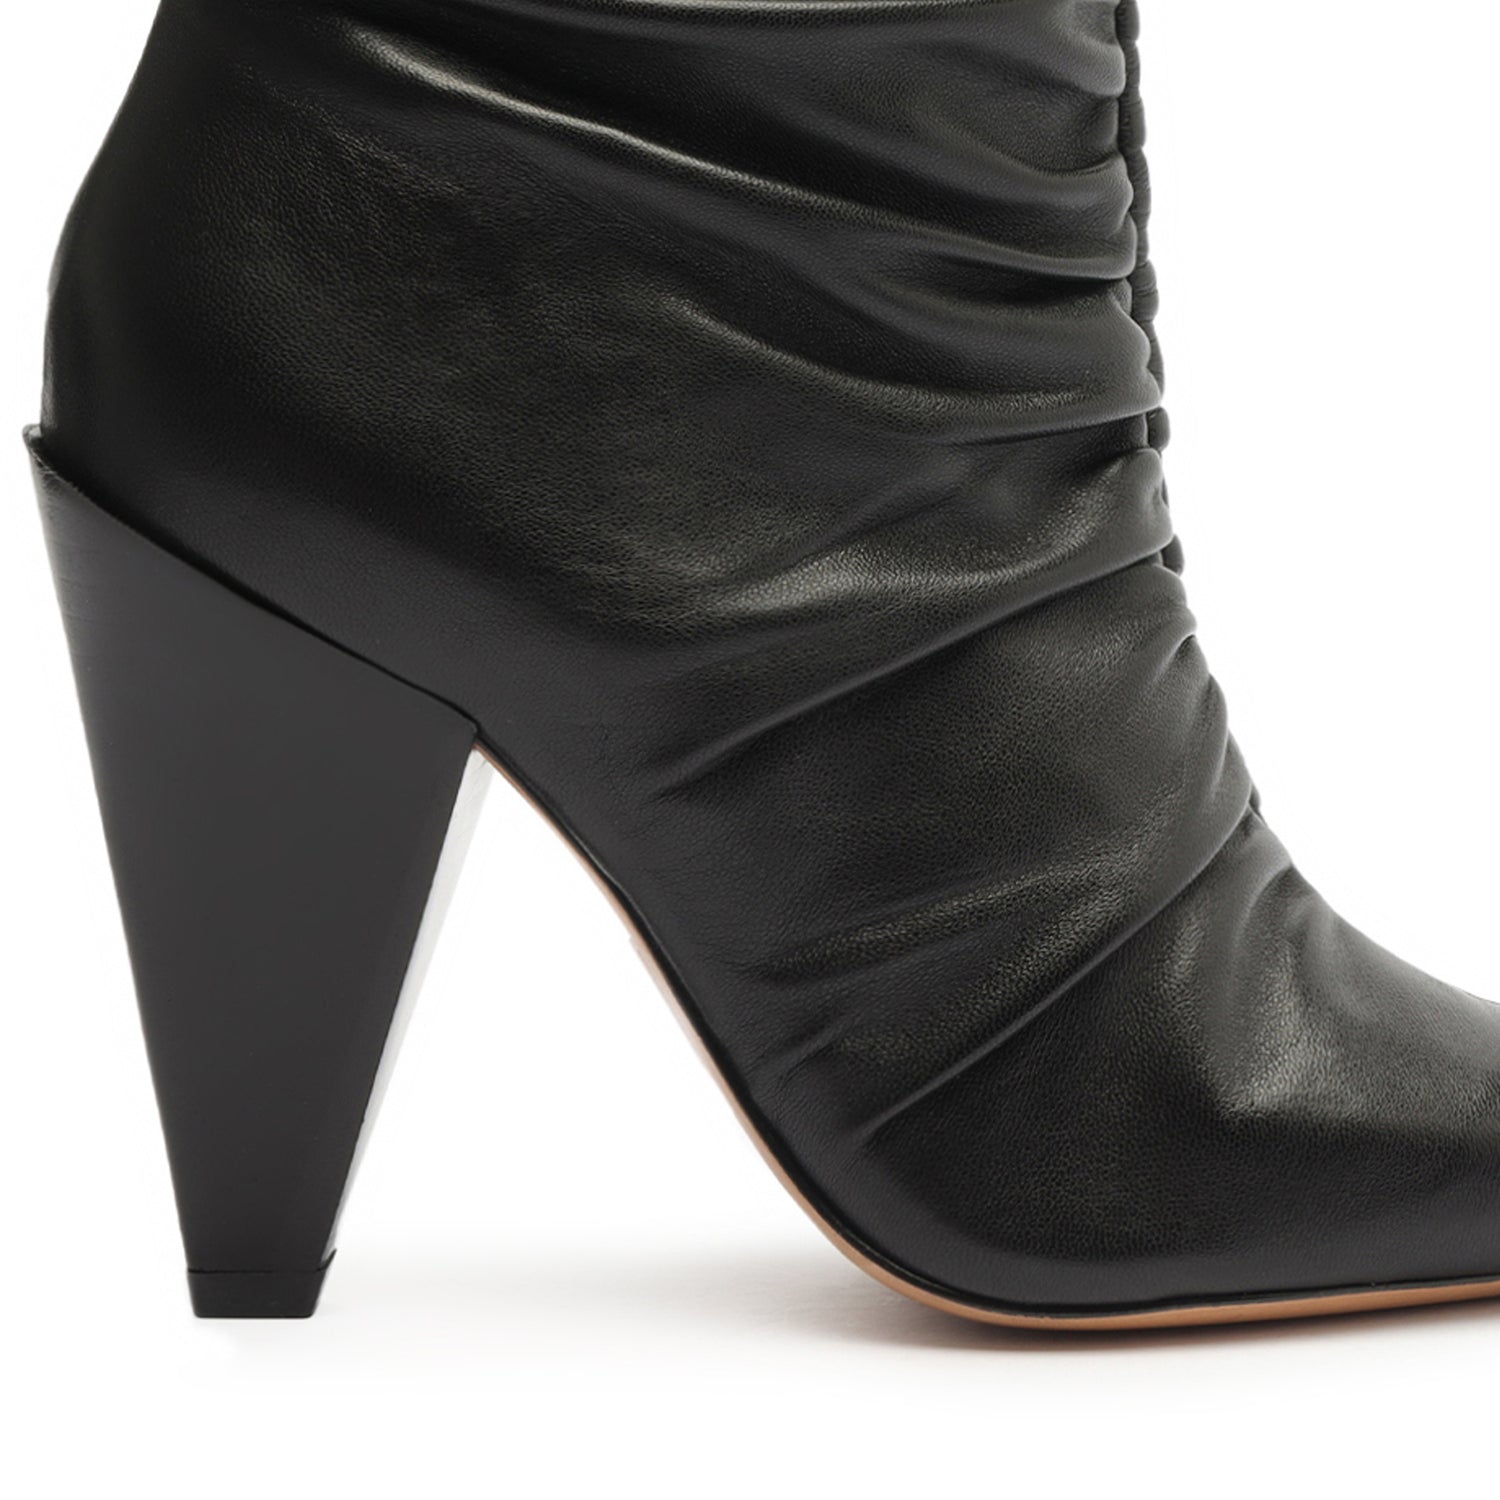 Lynn Nappa Leather Bootie Booties WINTER 23    - Schutz Shoes